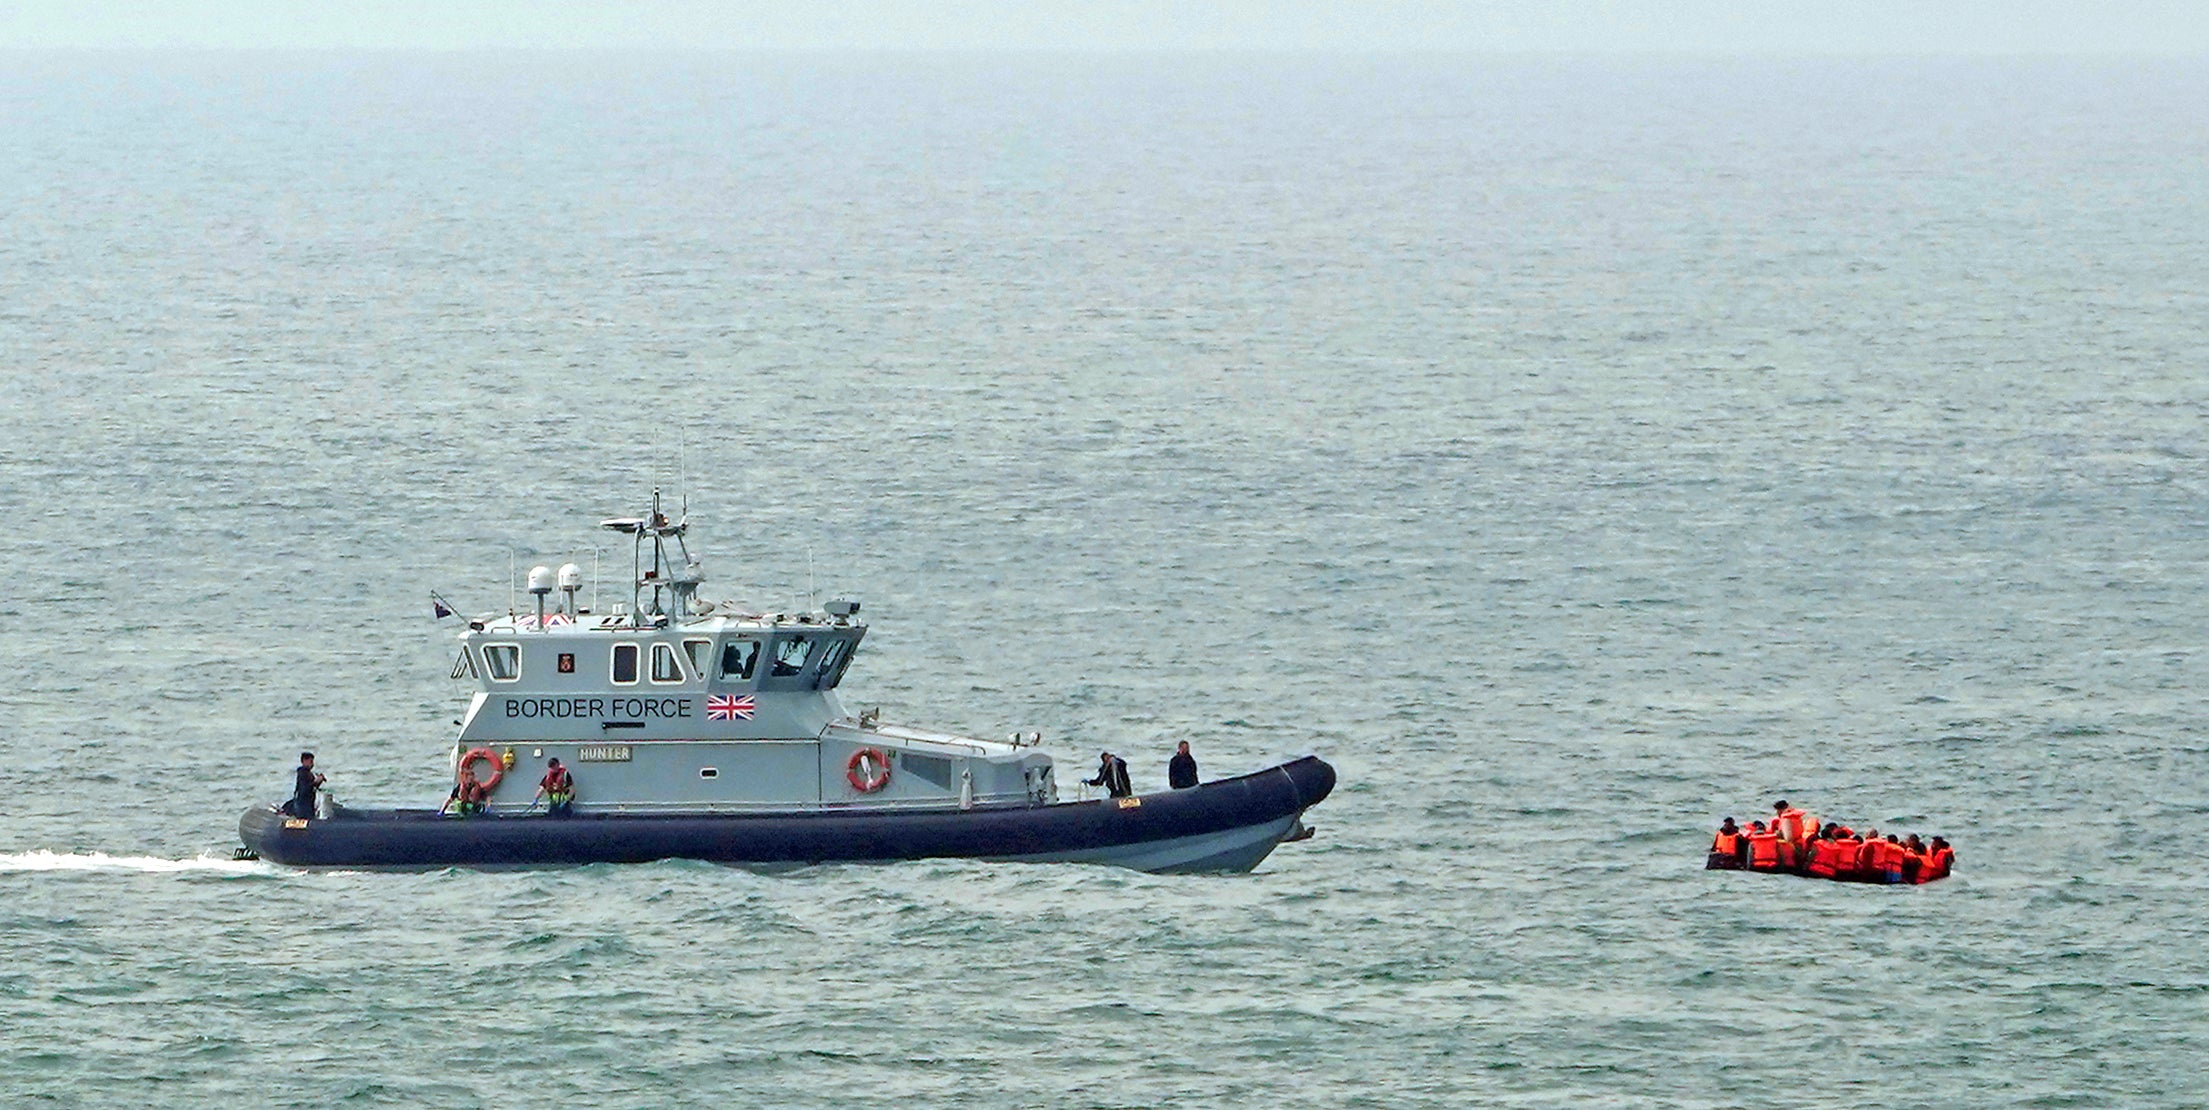 A Border Force vessel approaches a group of people in the Channel (Gareth Fuller/PA)